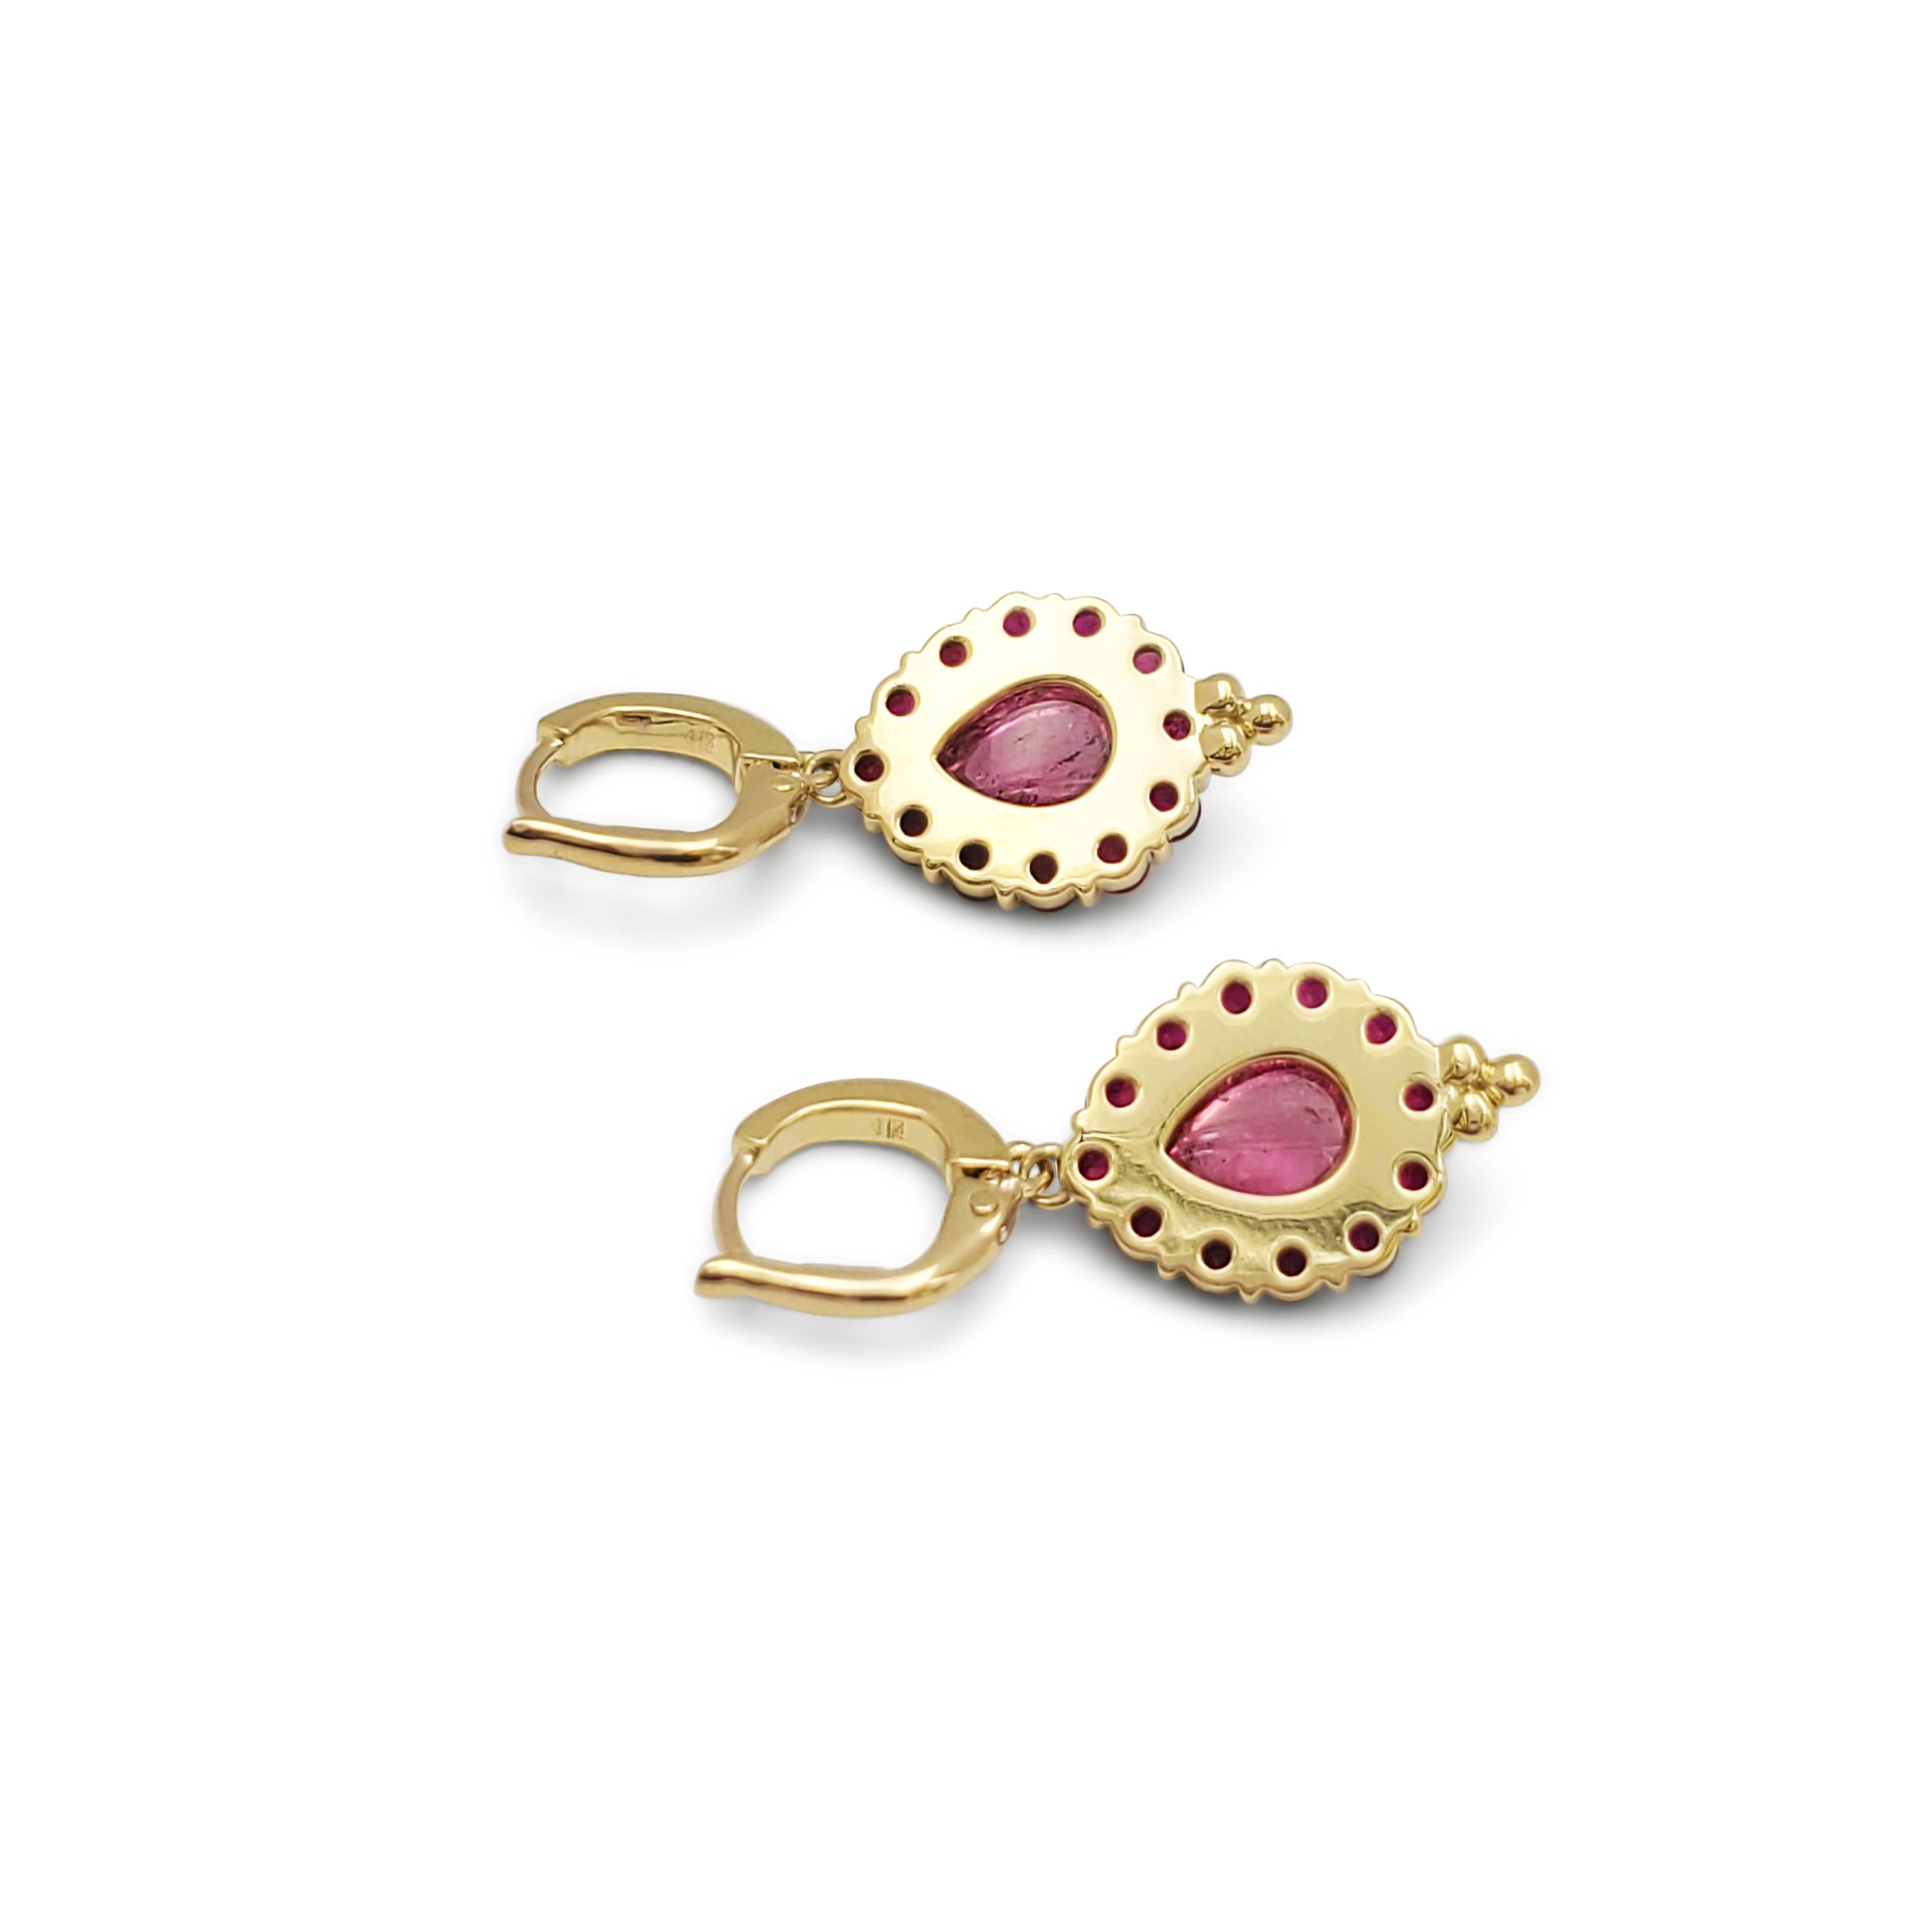 Cabochon Temple St. Clair 18K 'Color Theory' Ruby, Tourmaline and Diamond Earrings